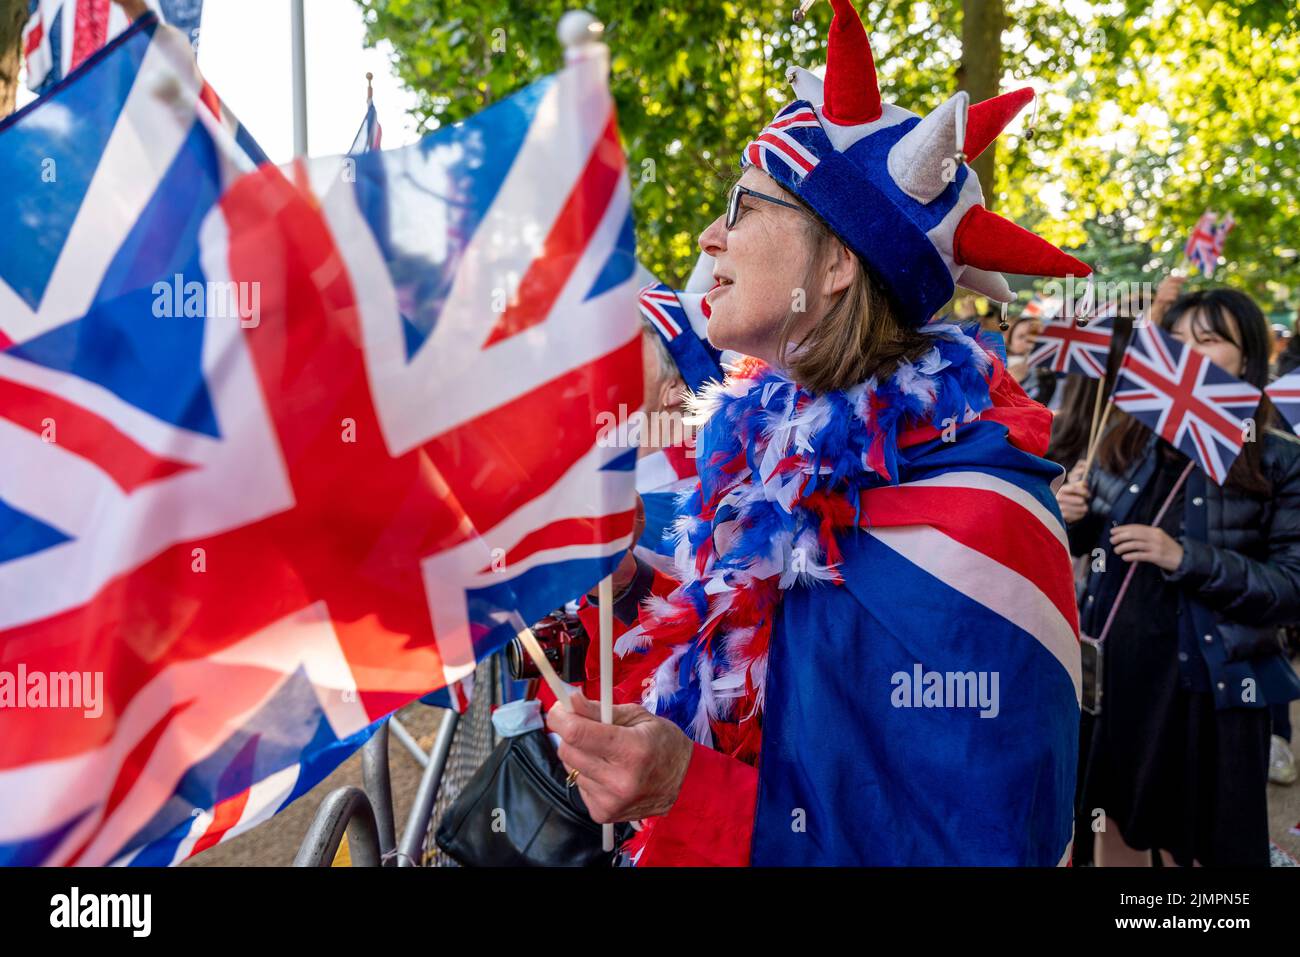 A Group Of British People Having Camped Out Overnight Along The Mall Sing The National Anthem For The Benefit Of The Foreign Press, London, UK. Stock Photo